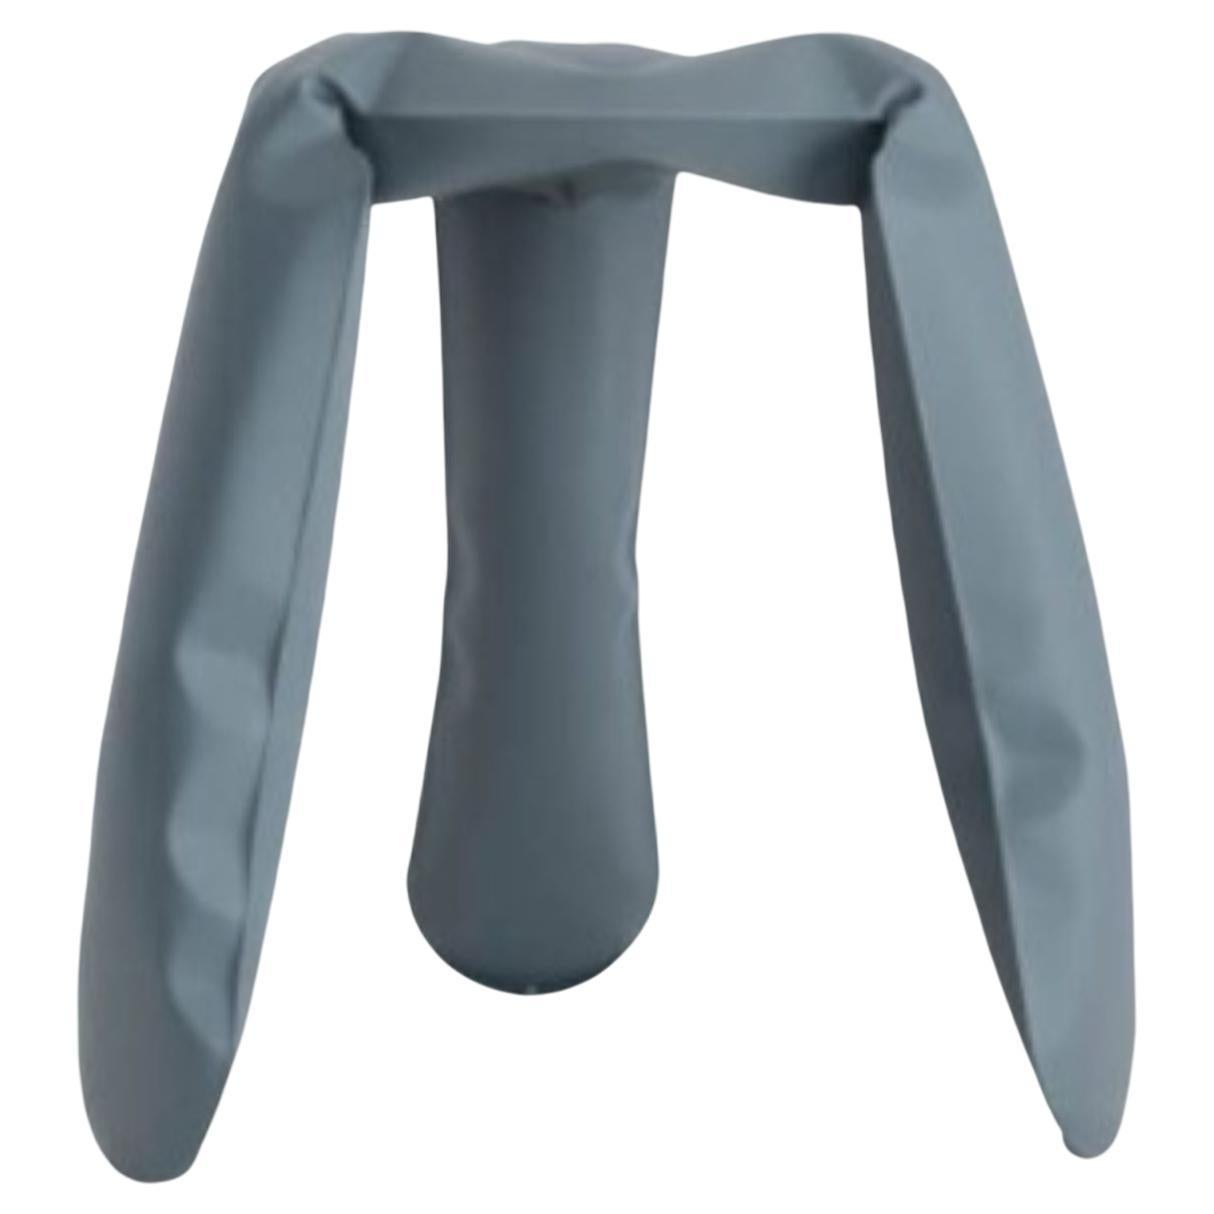 Blue grey aluminum Standard Plopp stool by Zieta
Dimensions: D 35 x H 50 cm 
Material: Aluminum. 
Finish: Powder-Coated. 
Available in colors: Graphite, Moss Grey, Umbra Grey, Beige Grey, Blue Grey. Available in Stainless Steel, Aluminum, and Carbon